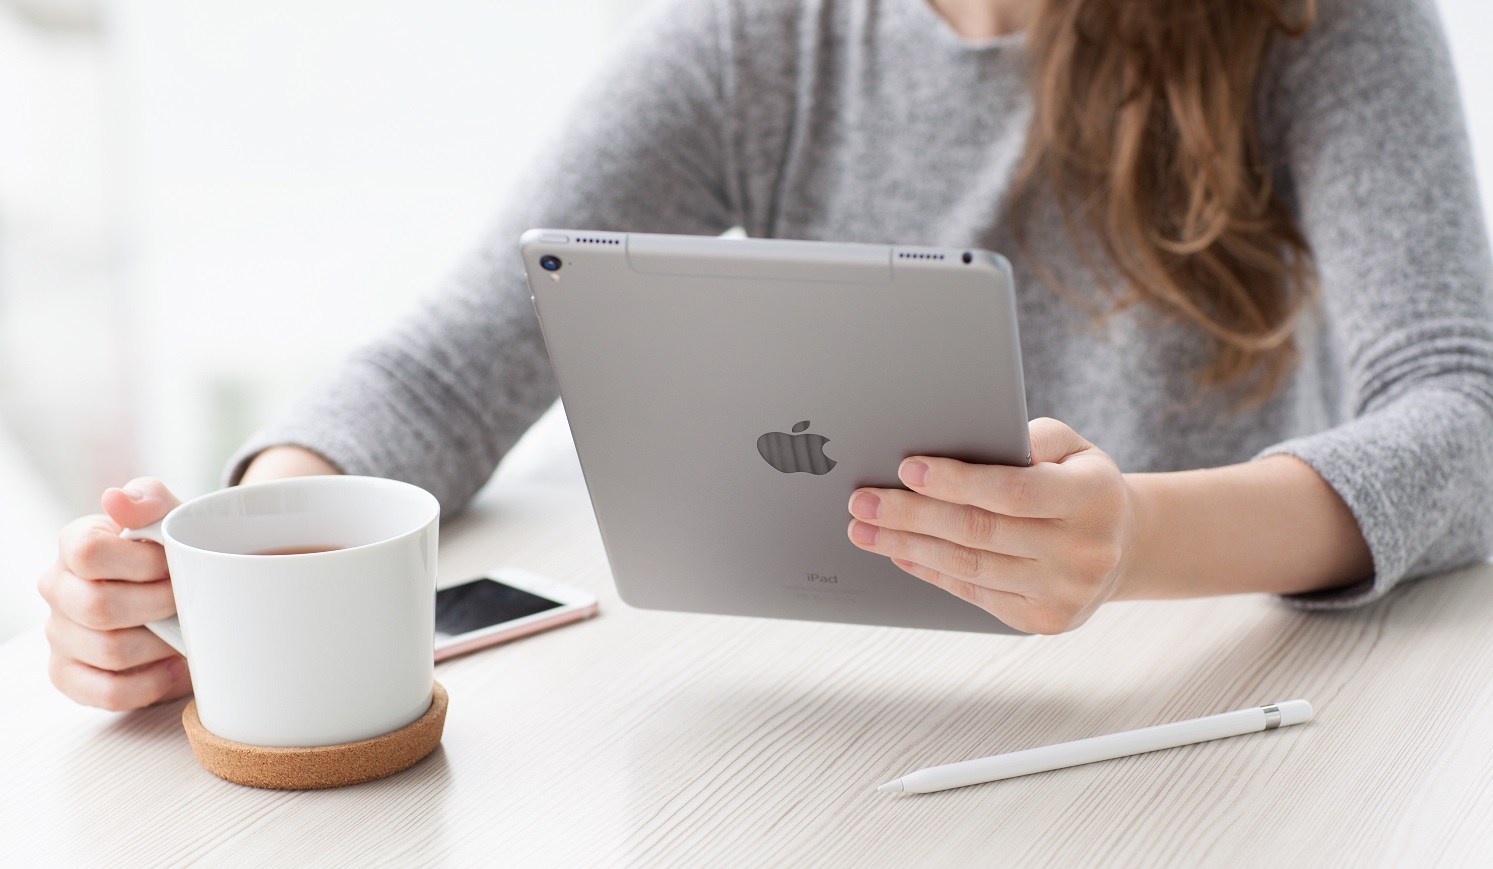 A woman with an iPad in one hand and a cup of coffee in the other